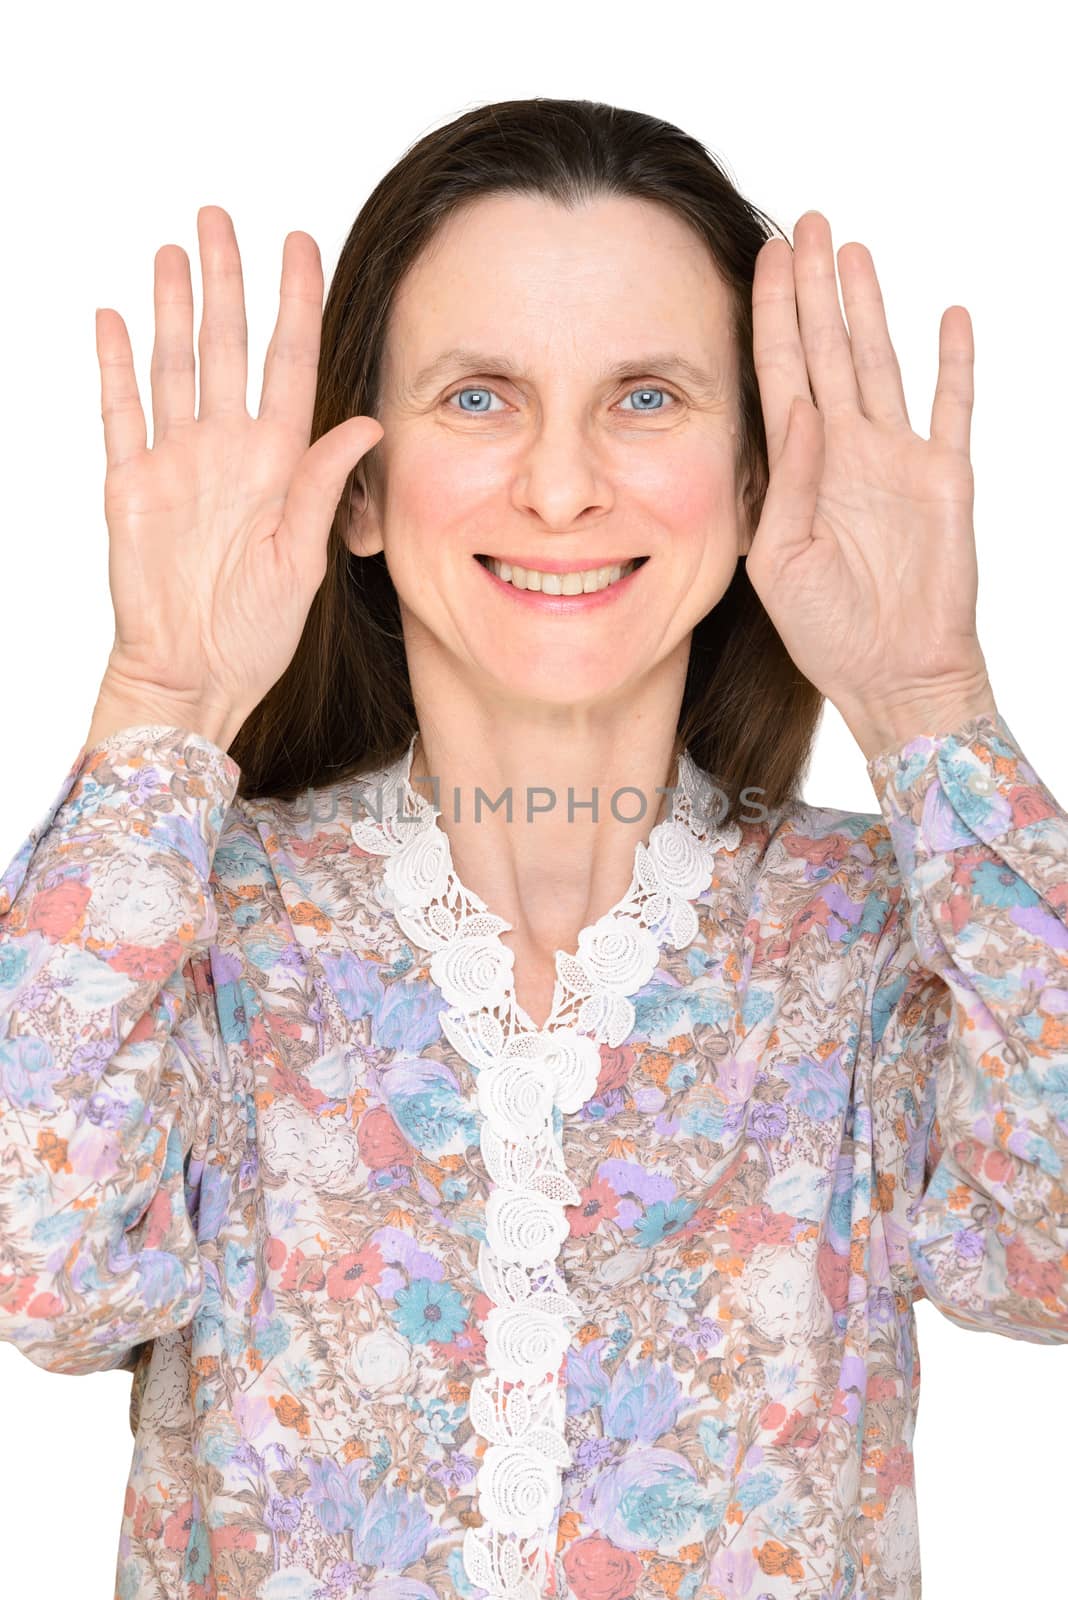 Smiling woman with open blue eyes and open hands up showing the palms close to the face